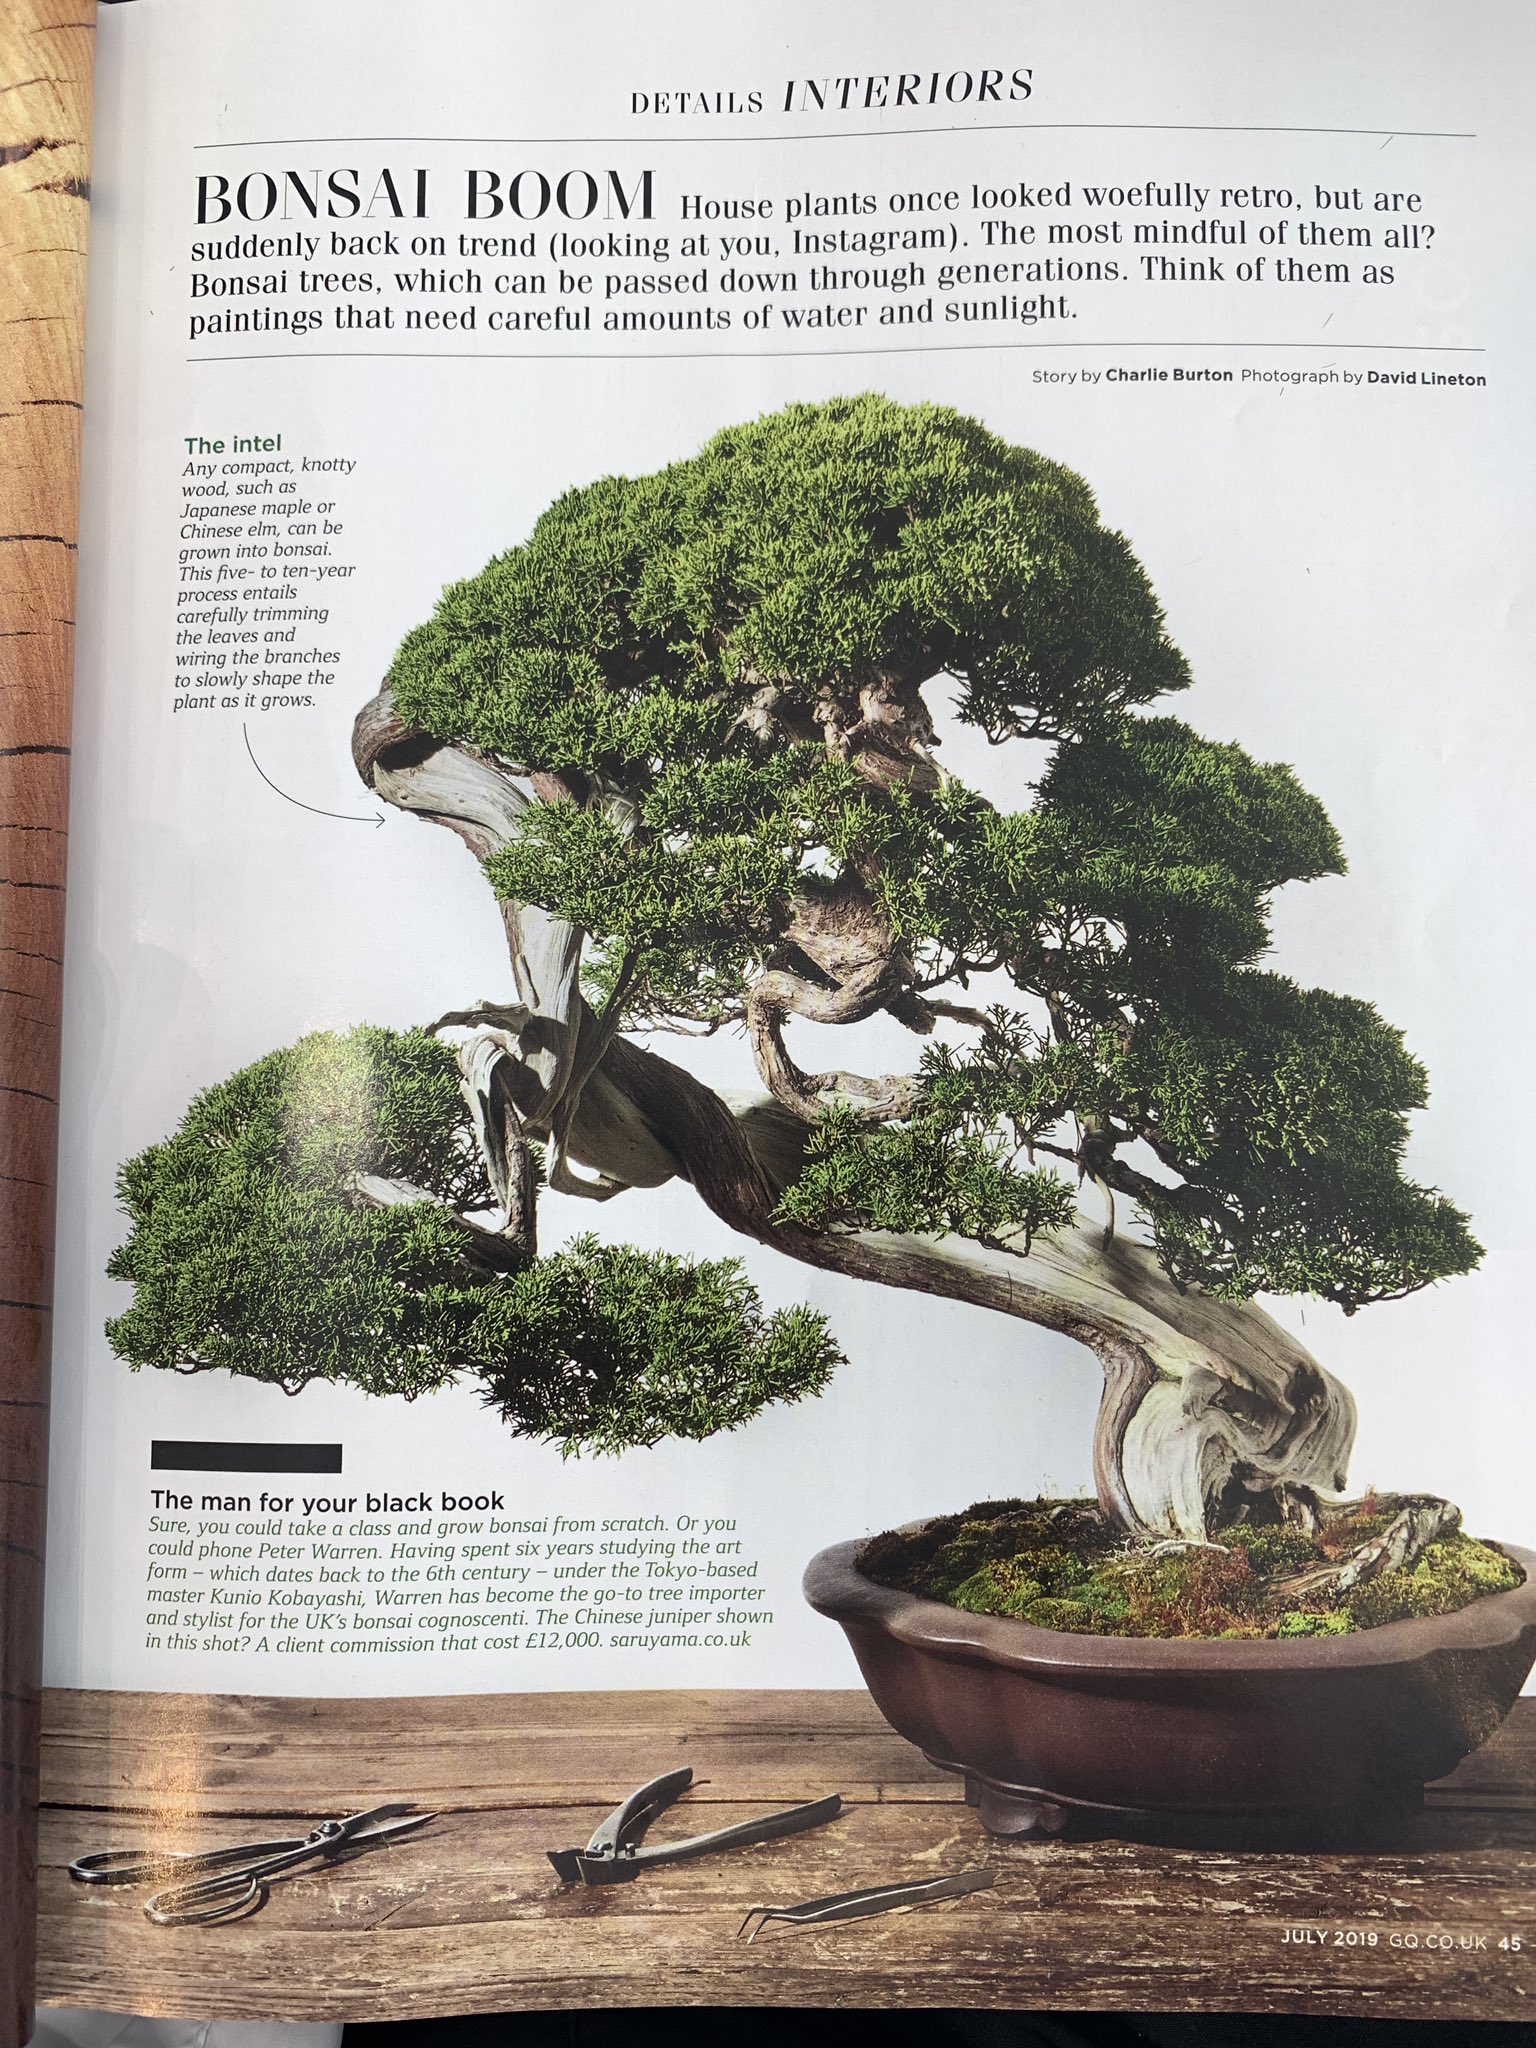 James Wong On Twitter I Thought My Fascination With Bonsai Was Simply The Inevitable Result Of Me Turning Into The Old Asian Man Stereotype Who Knew I Was Unknowingly Centrefold Britishgq All